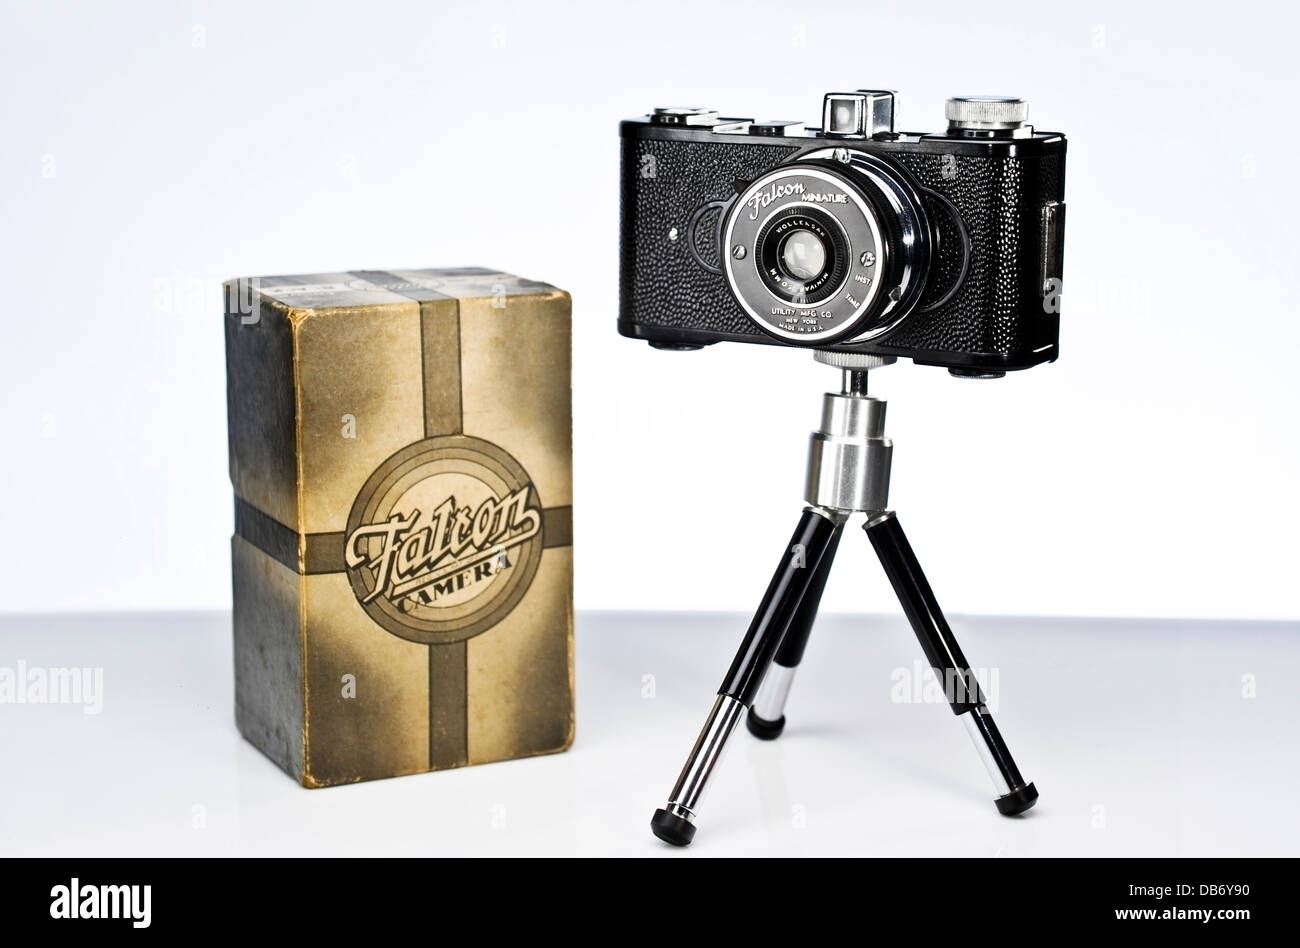 A vintage Falcon Miniature film camera from the 1930's and 1940's shown with original box. Stock Photo